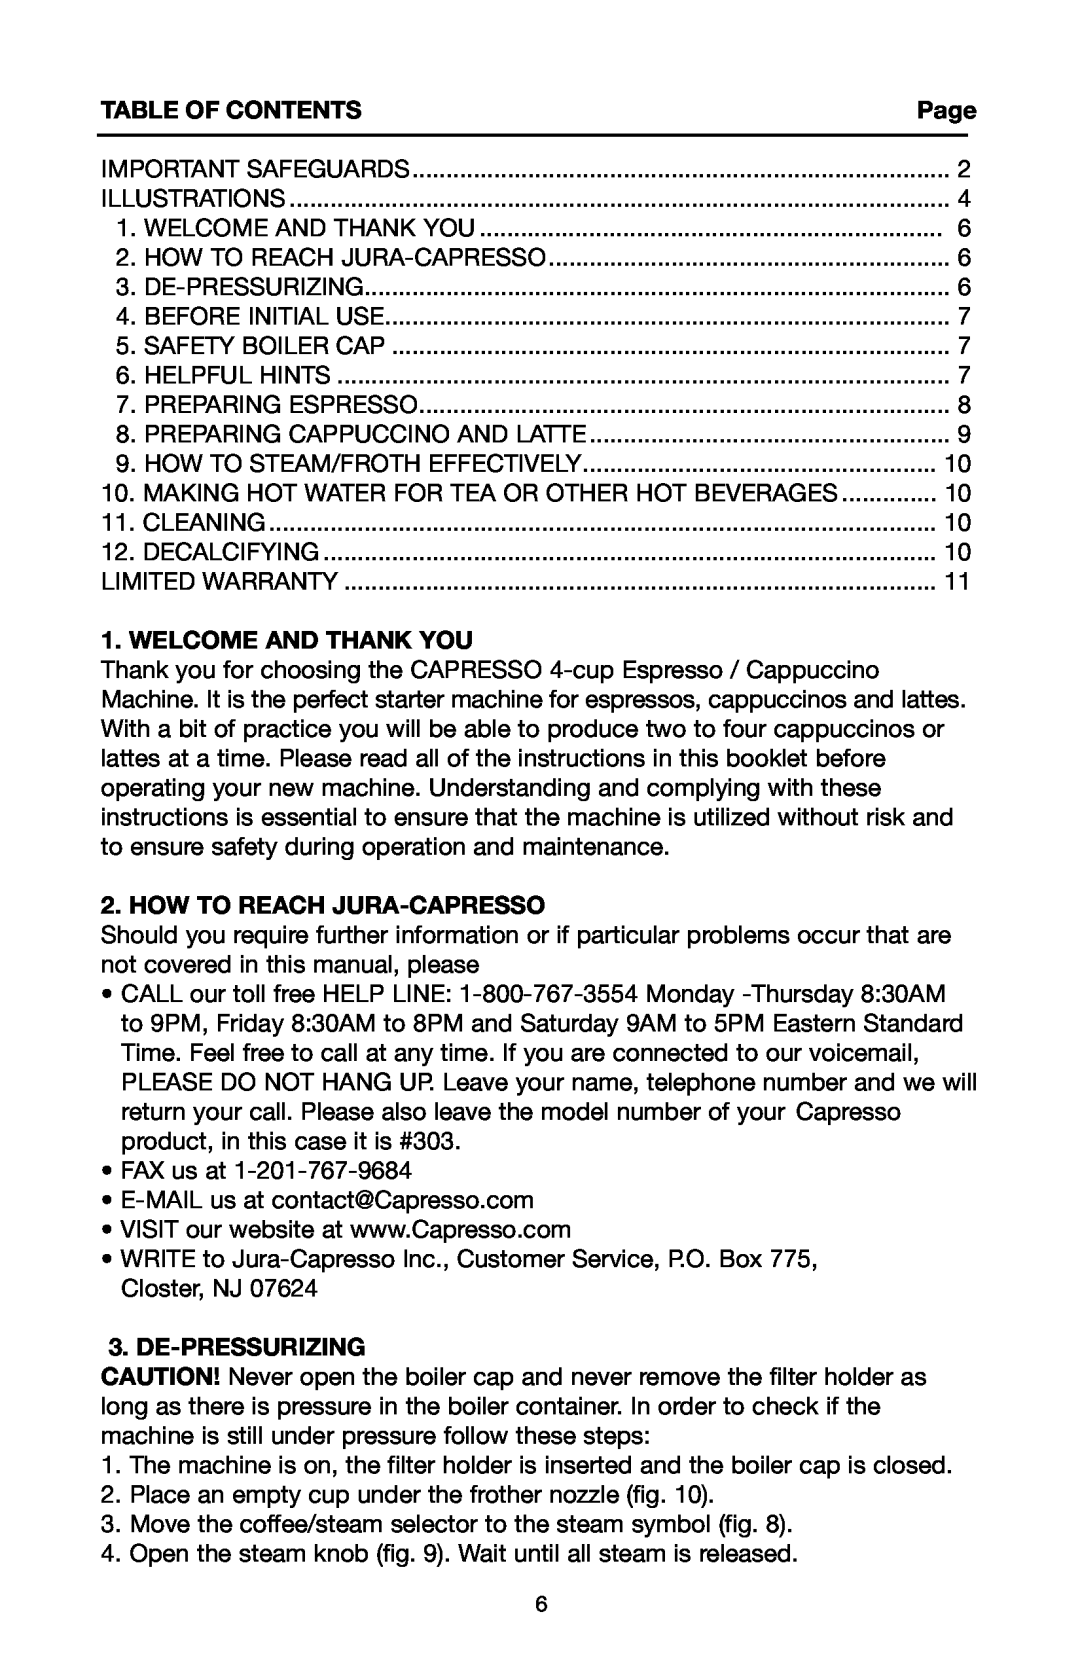 Capresso 4C1210, 303 warranty Table Of Contents, Page, Welcome And Thank You, How To Reach Jura-Capresso, De-Pressurizing 